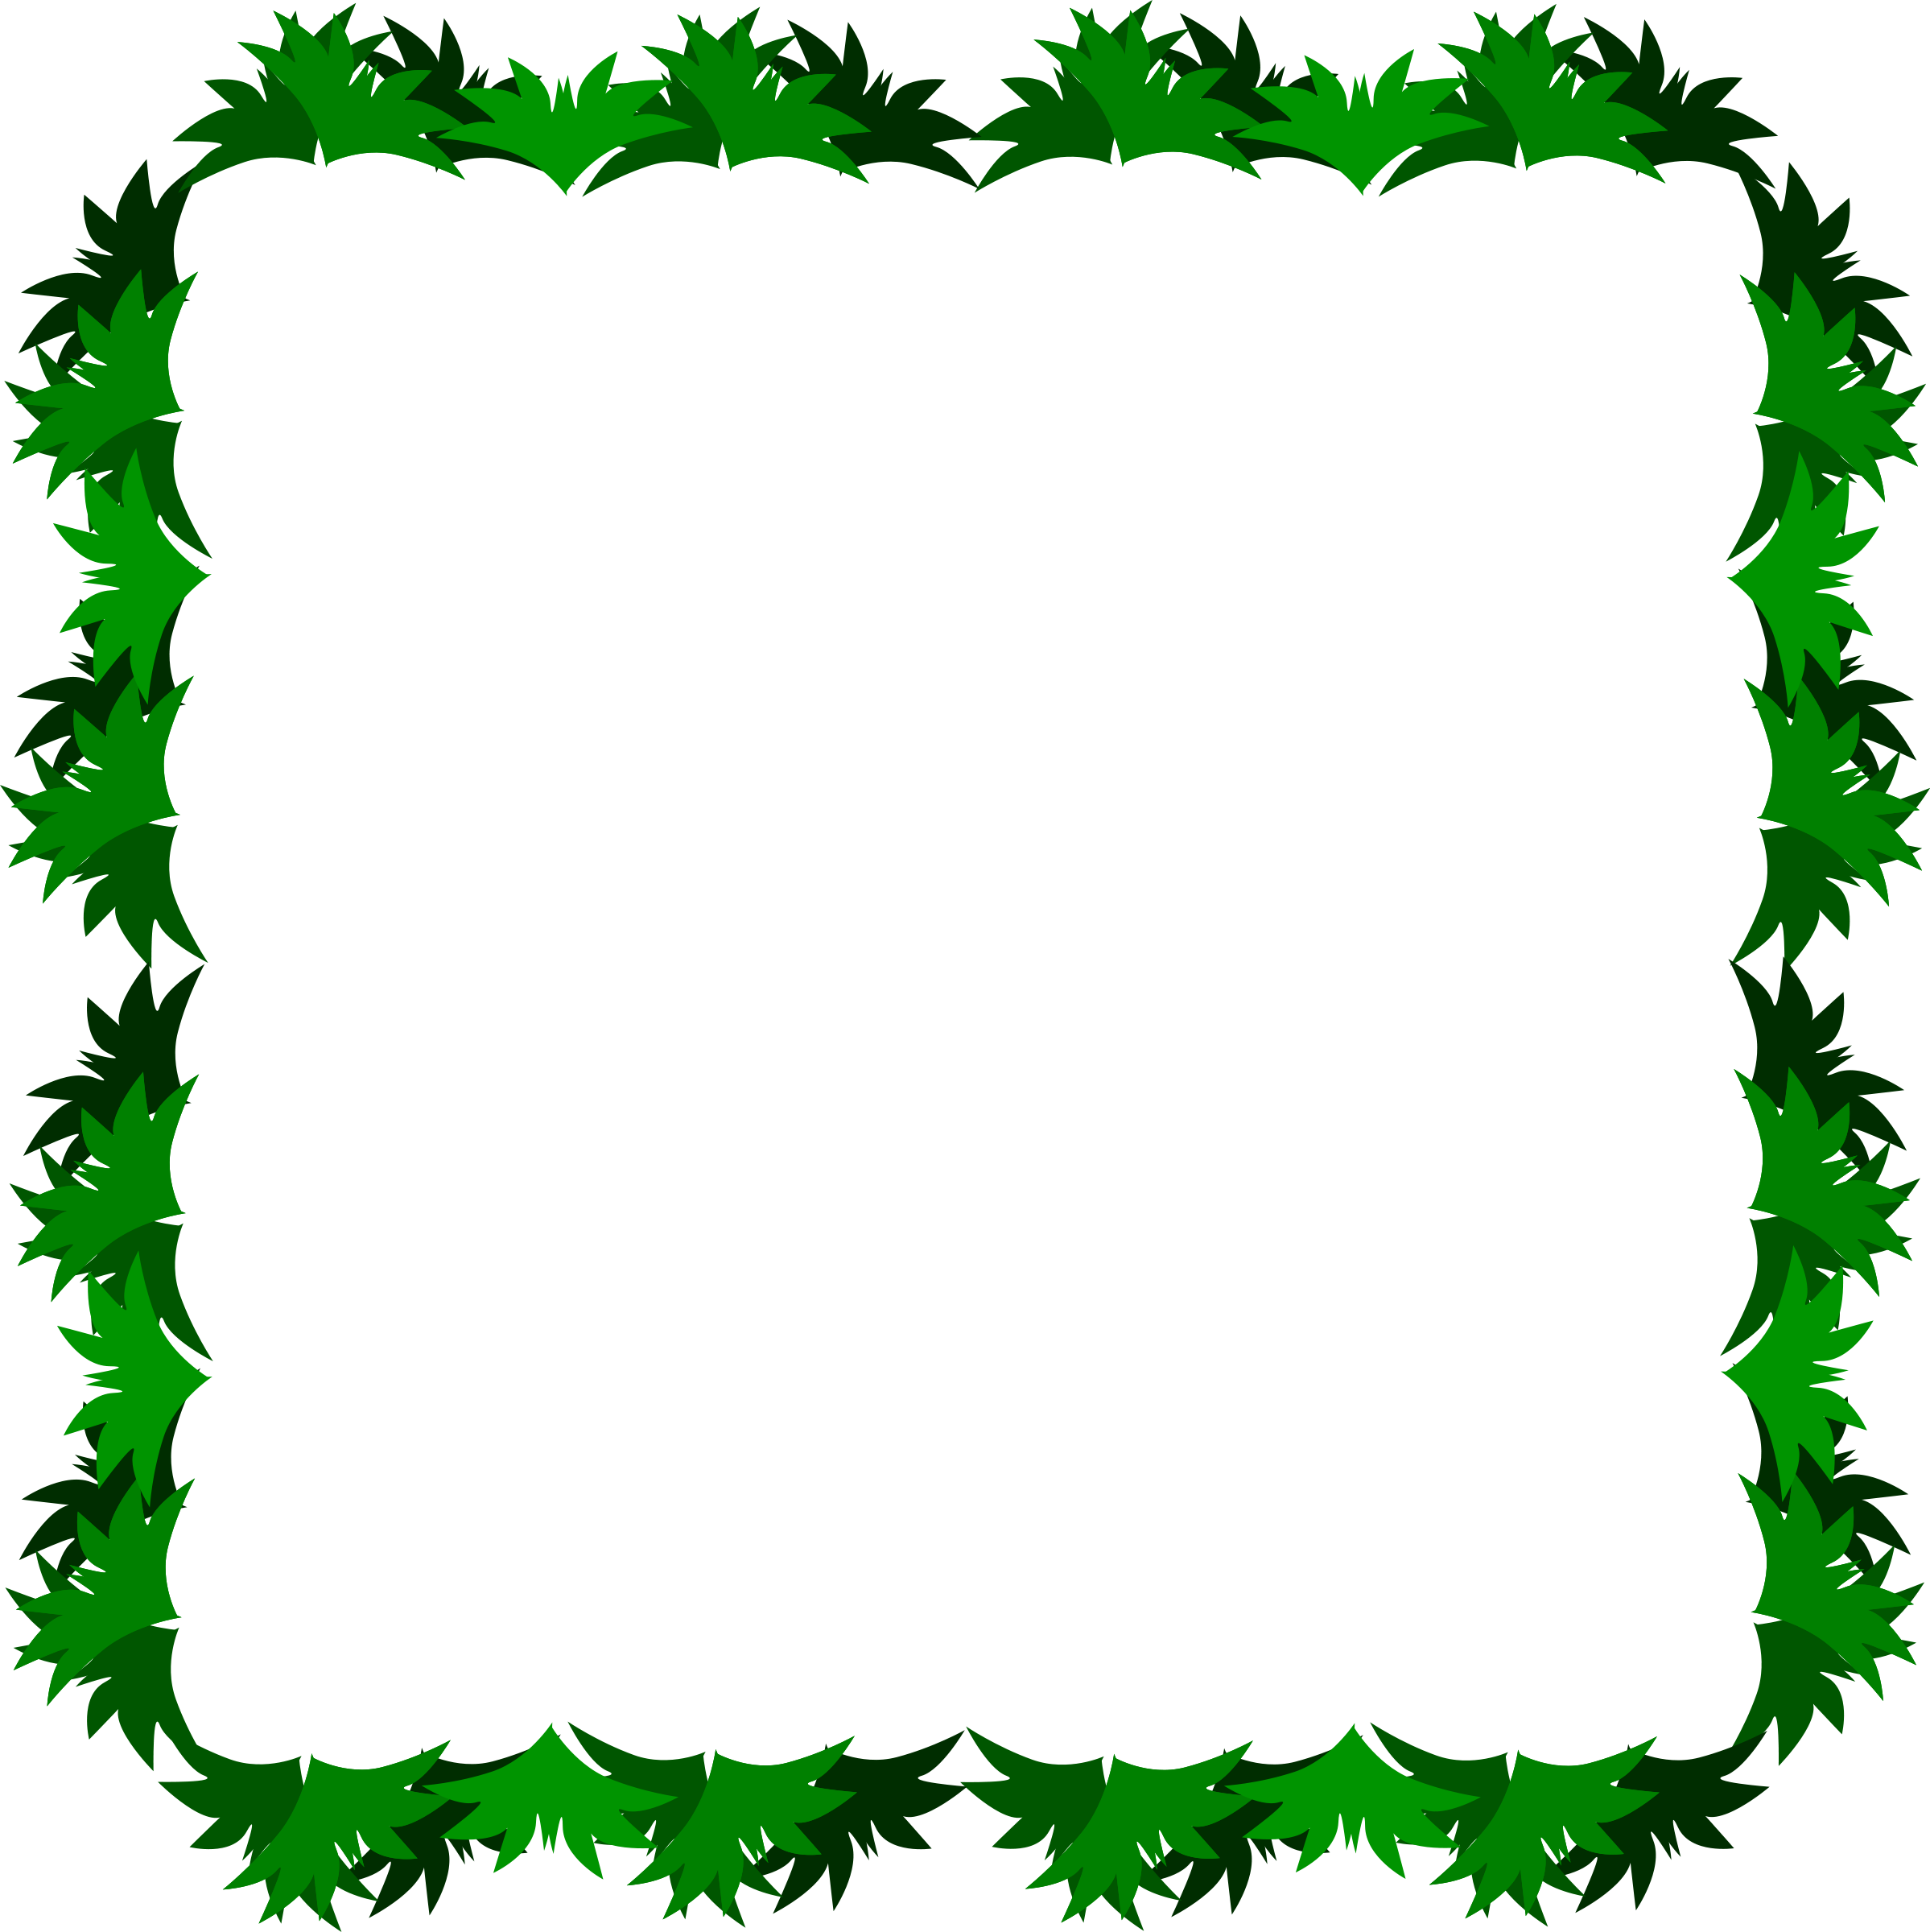 Grass Outline Border   Clipart Panda   Free Clipart Images